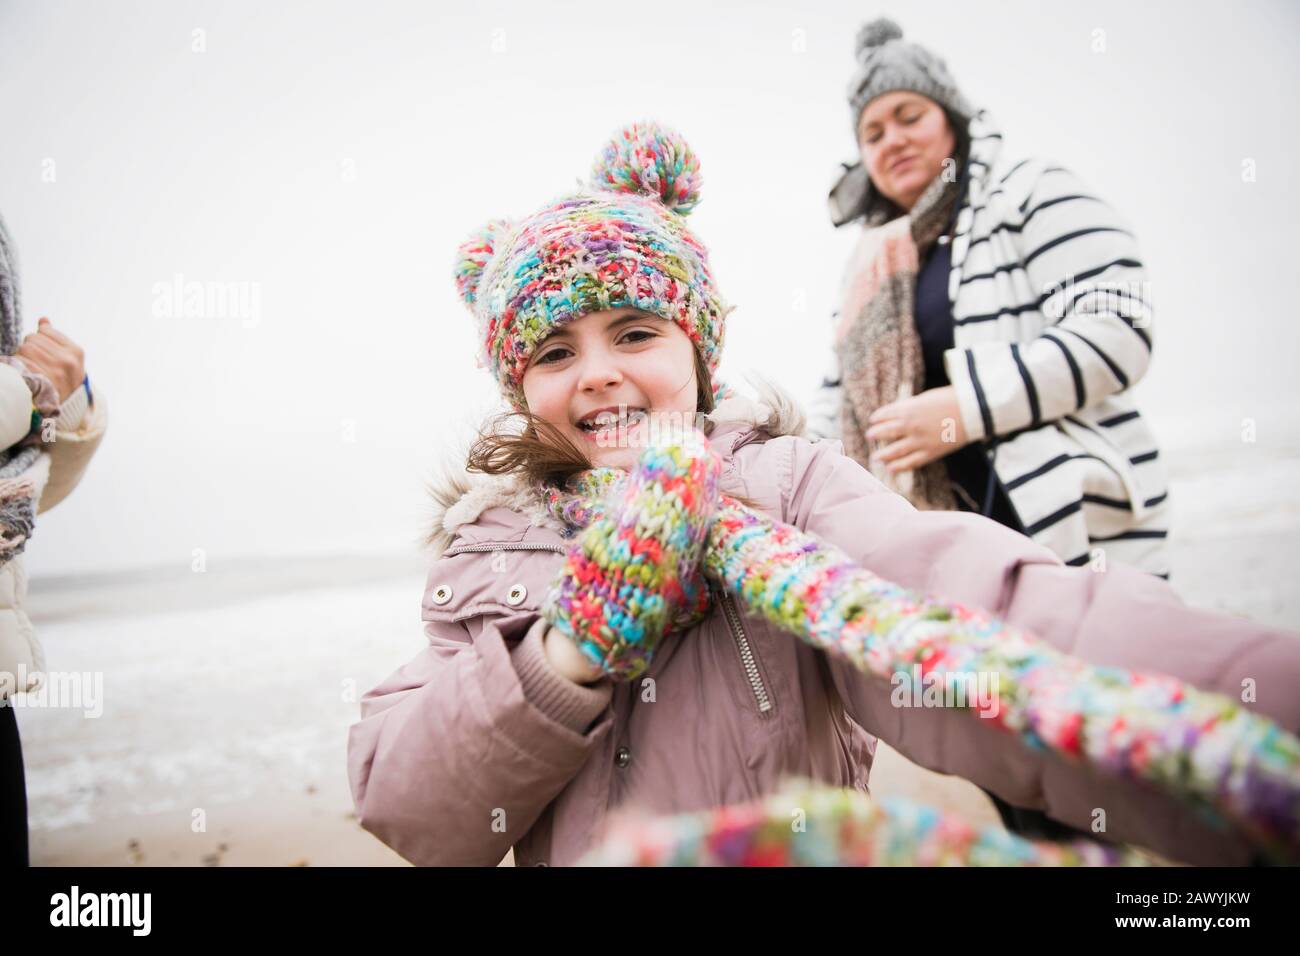 Portrait happy carefree girl in warm clothing on winter beach Stock Photo